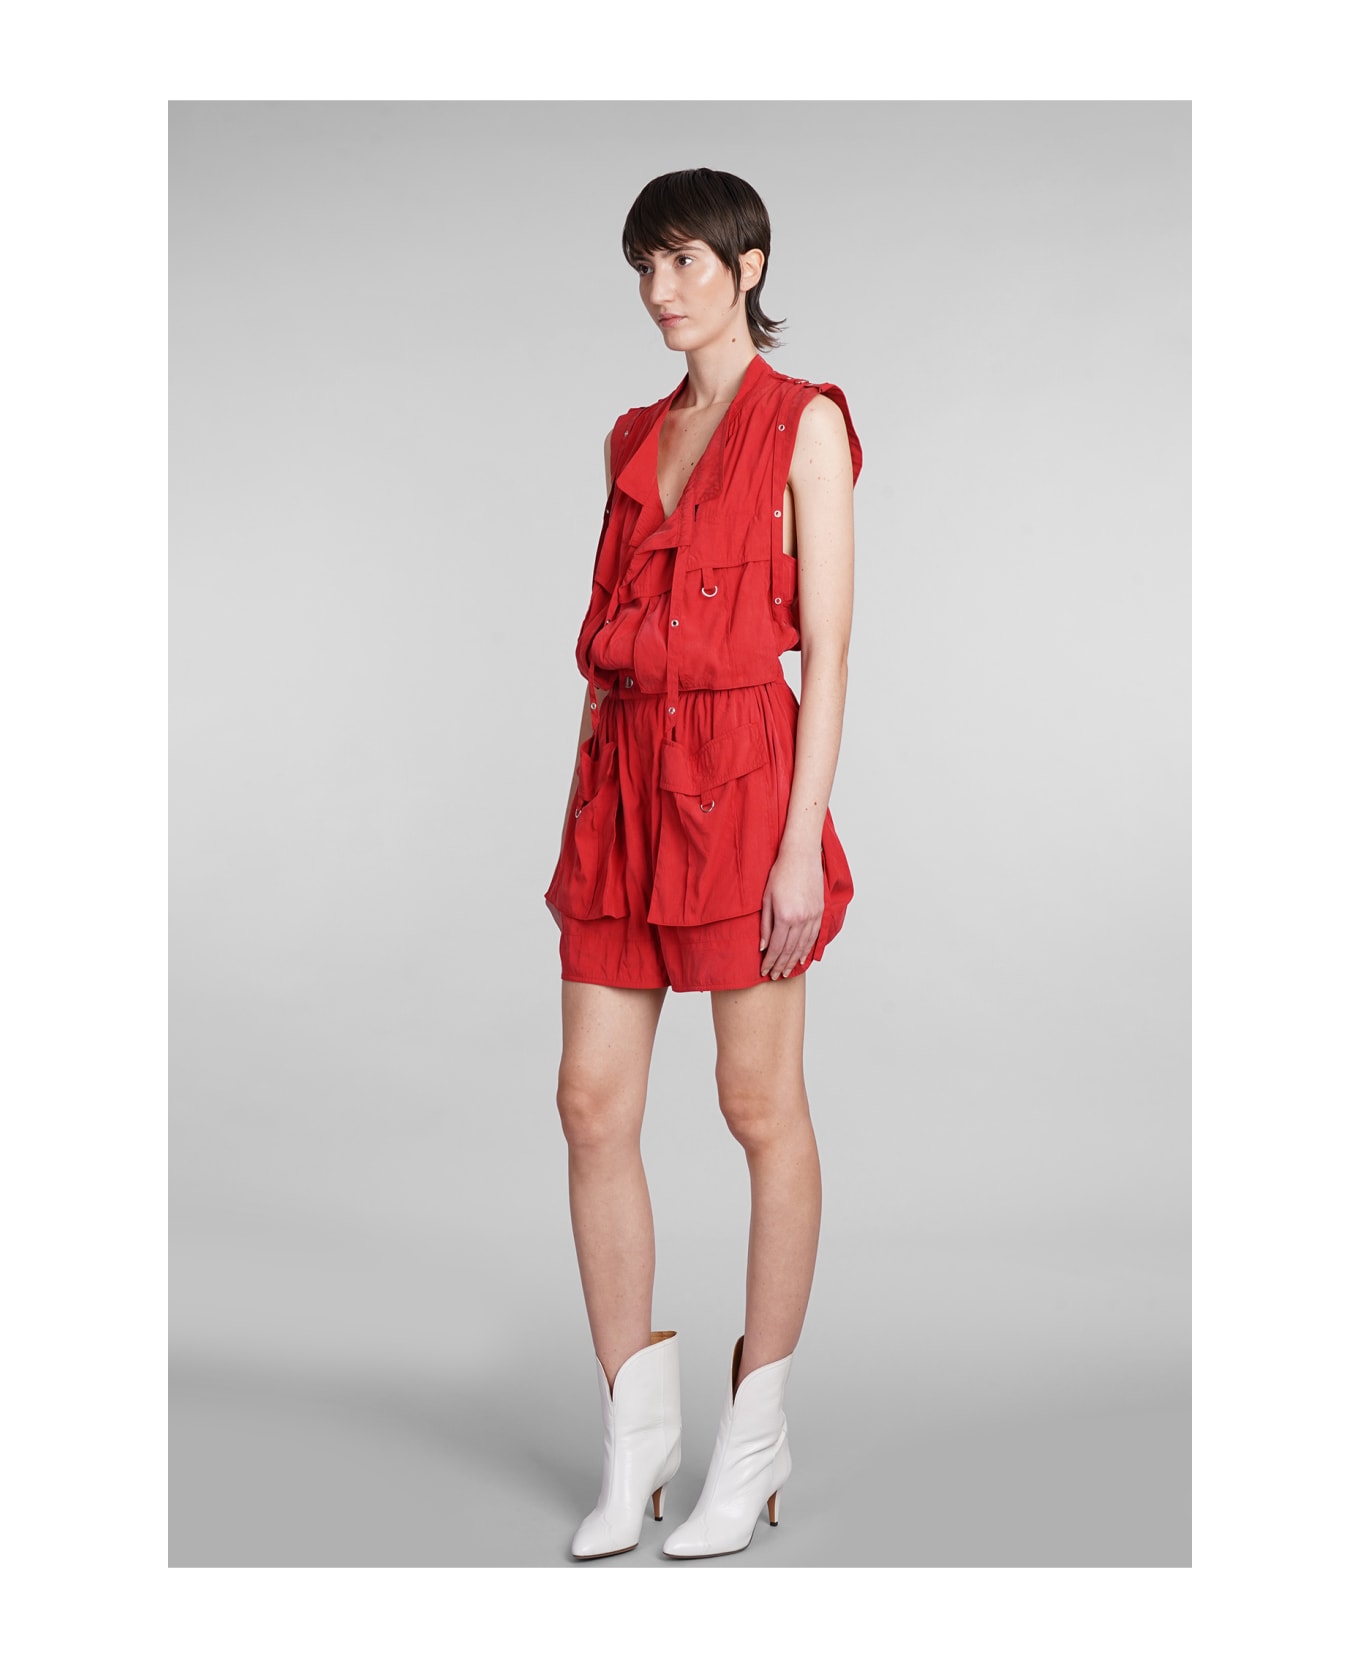 Isabel Marant Hanelor Suit In Red Wool And Polyester - red